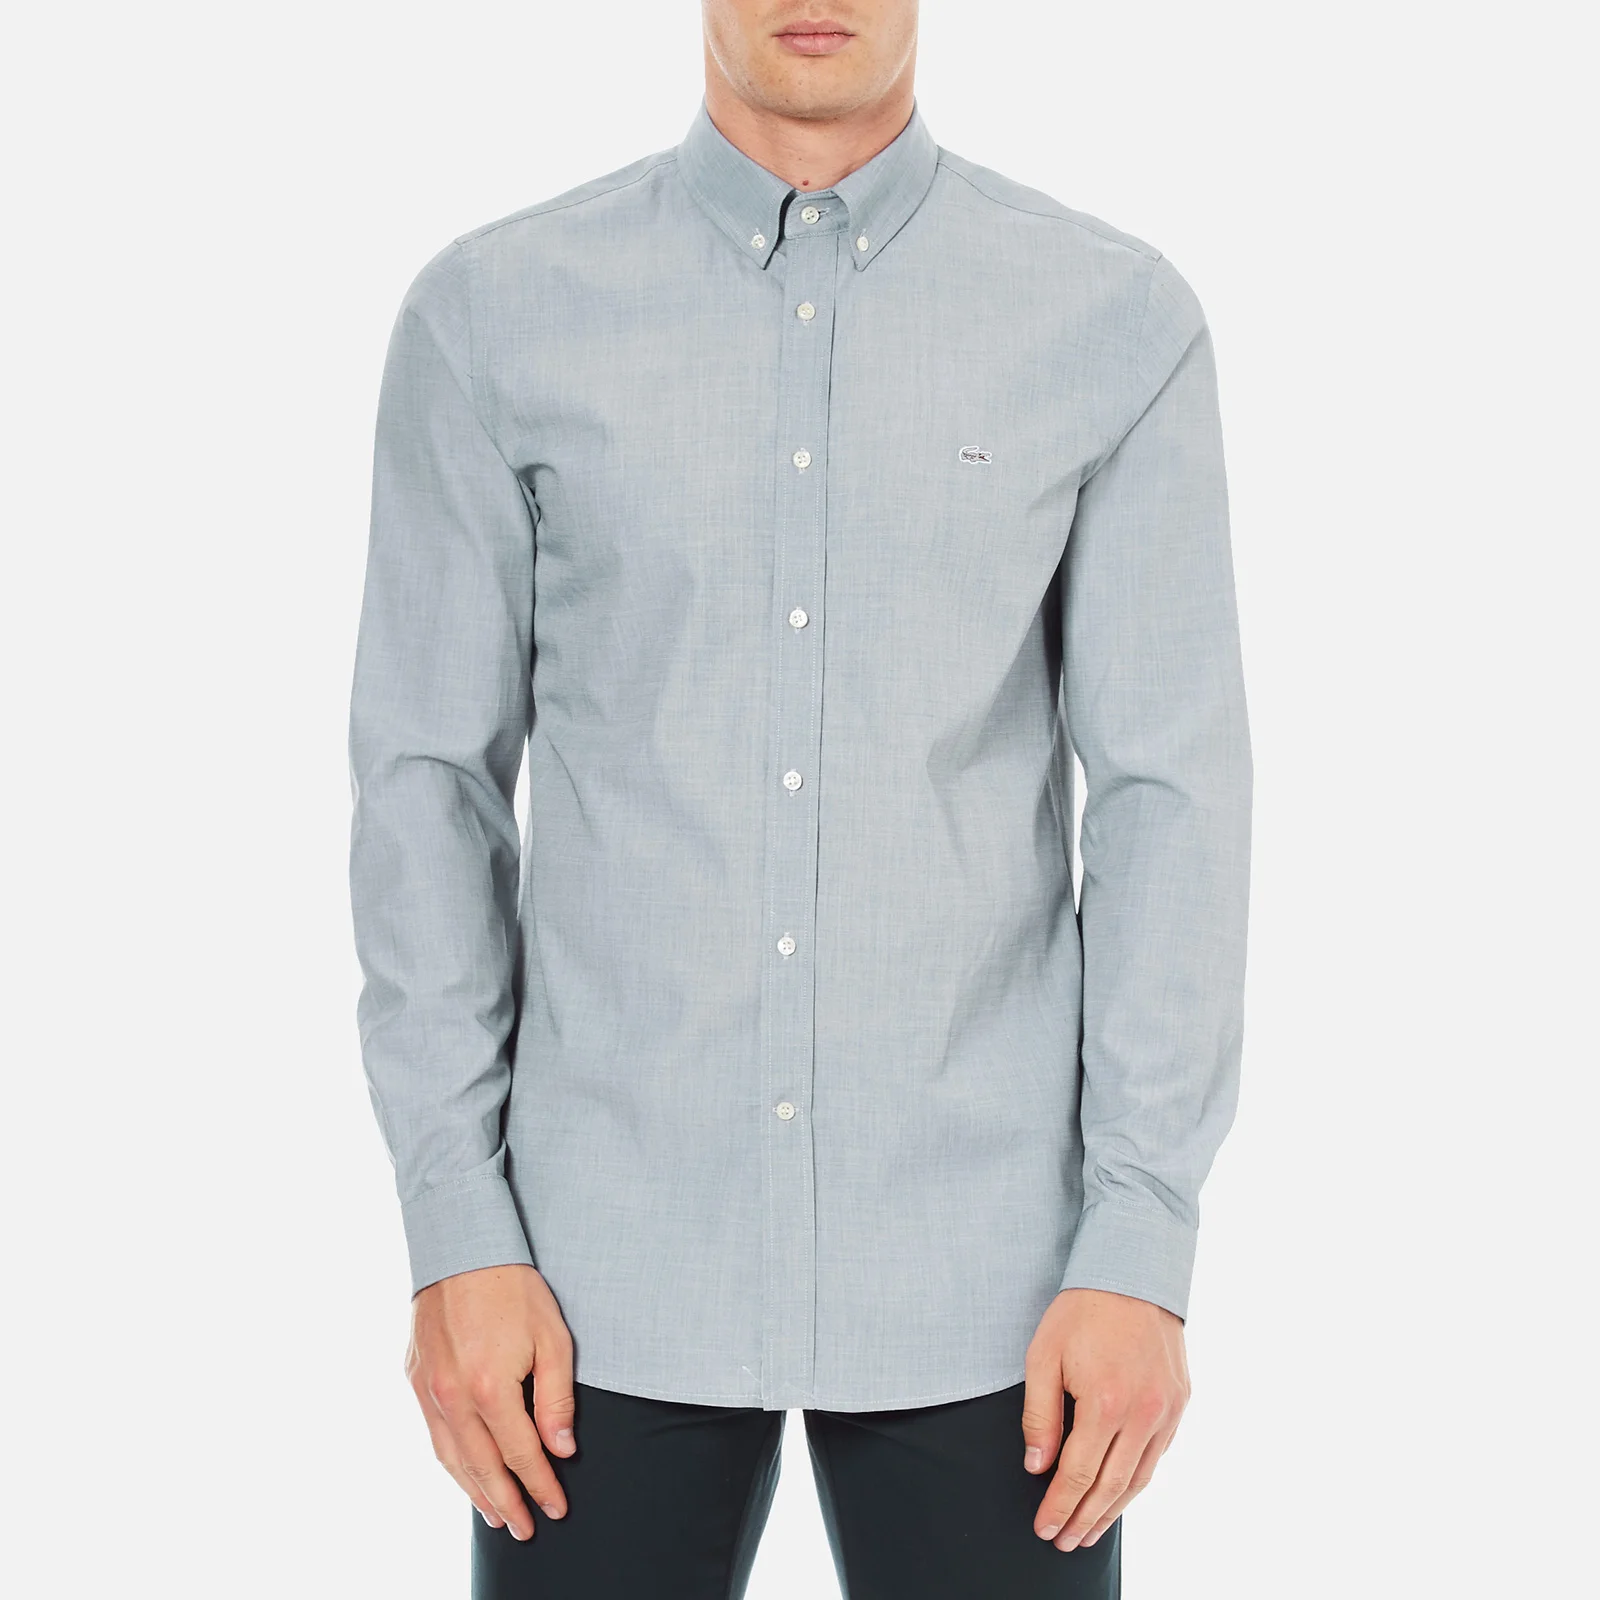 Lacoste Men's Long Sleeved City Shirt - Philippines Blue Image 1